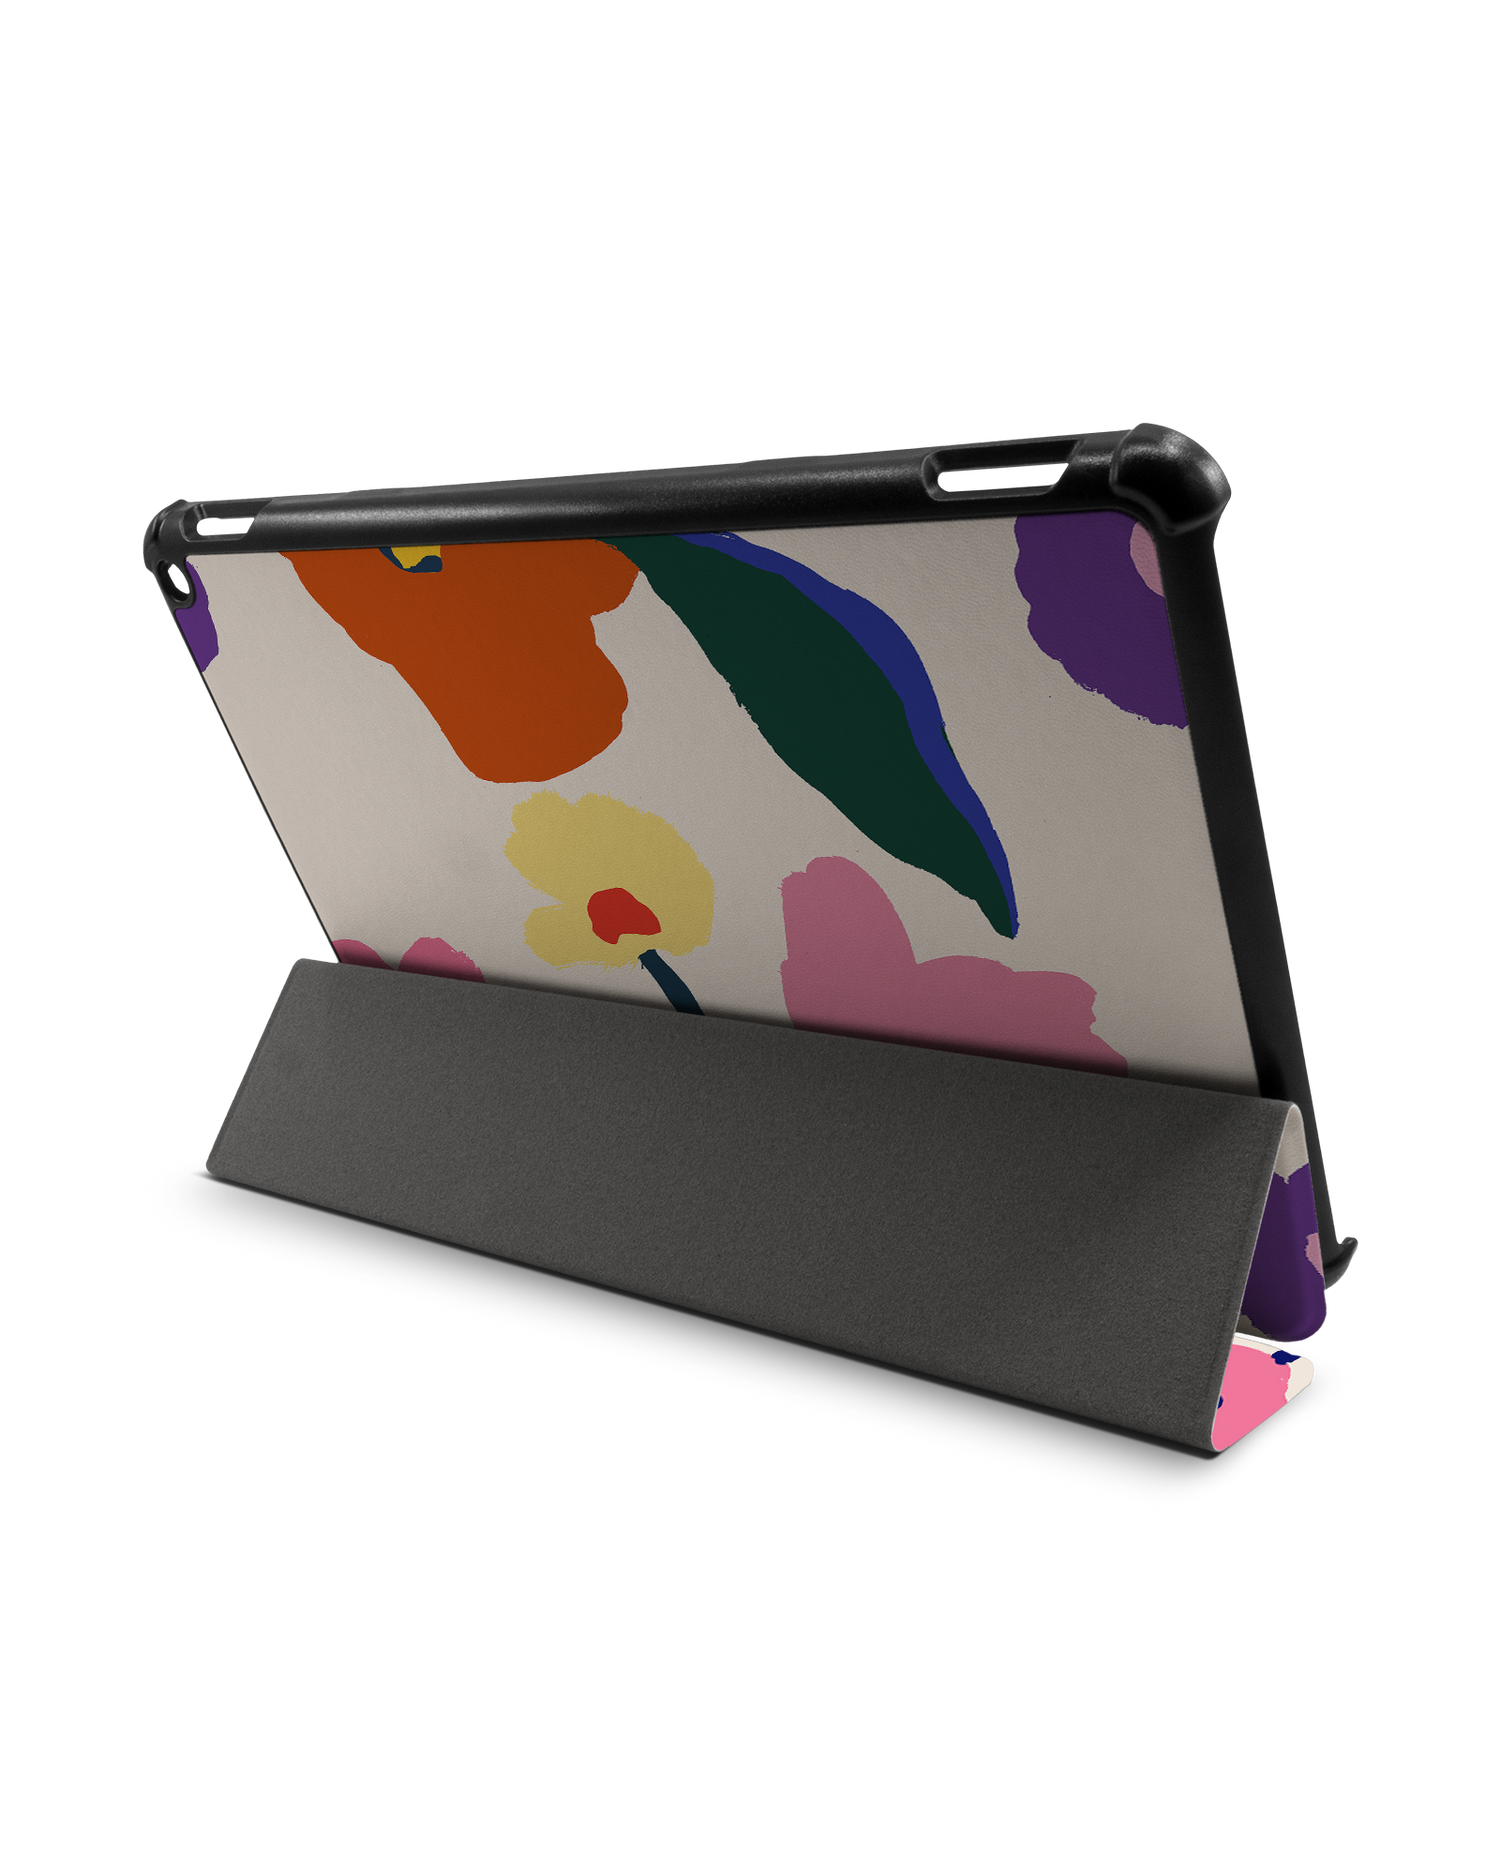 Handpainted Blooms Tablet Smart Case for Amazon Fire HD 10 (2021): Used as Stand